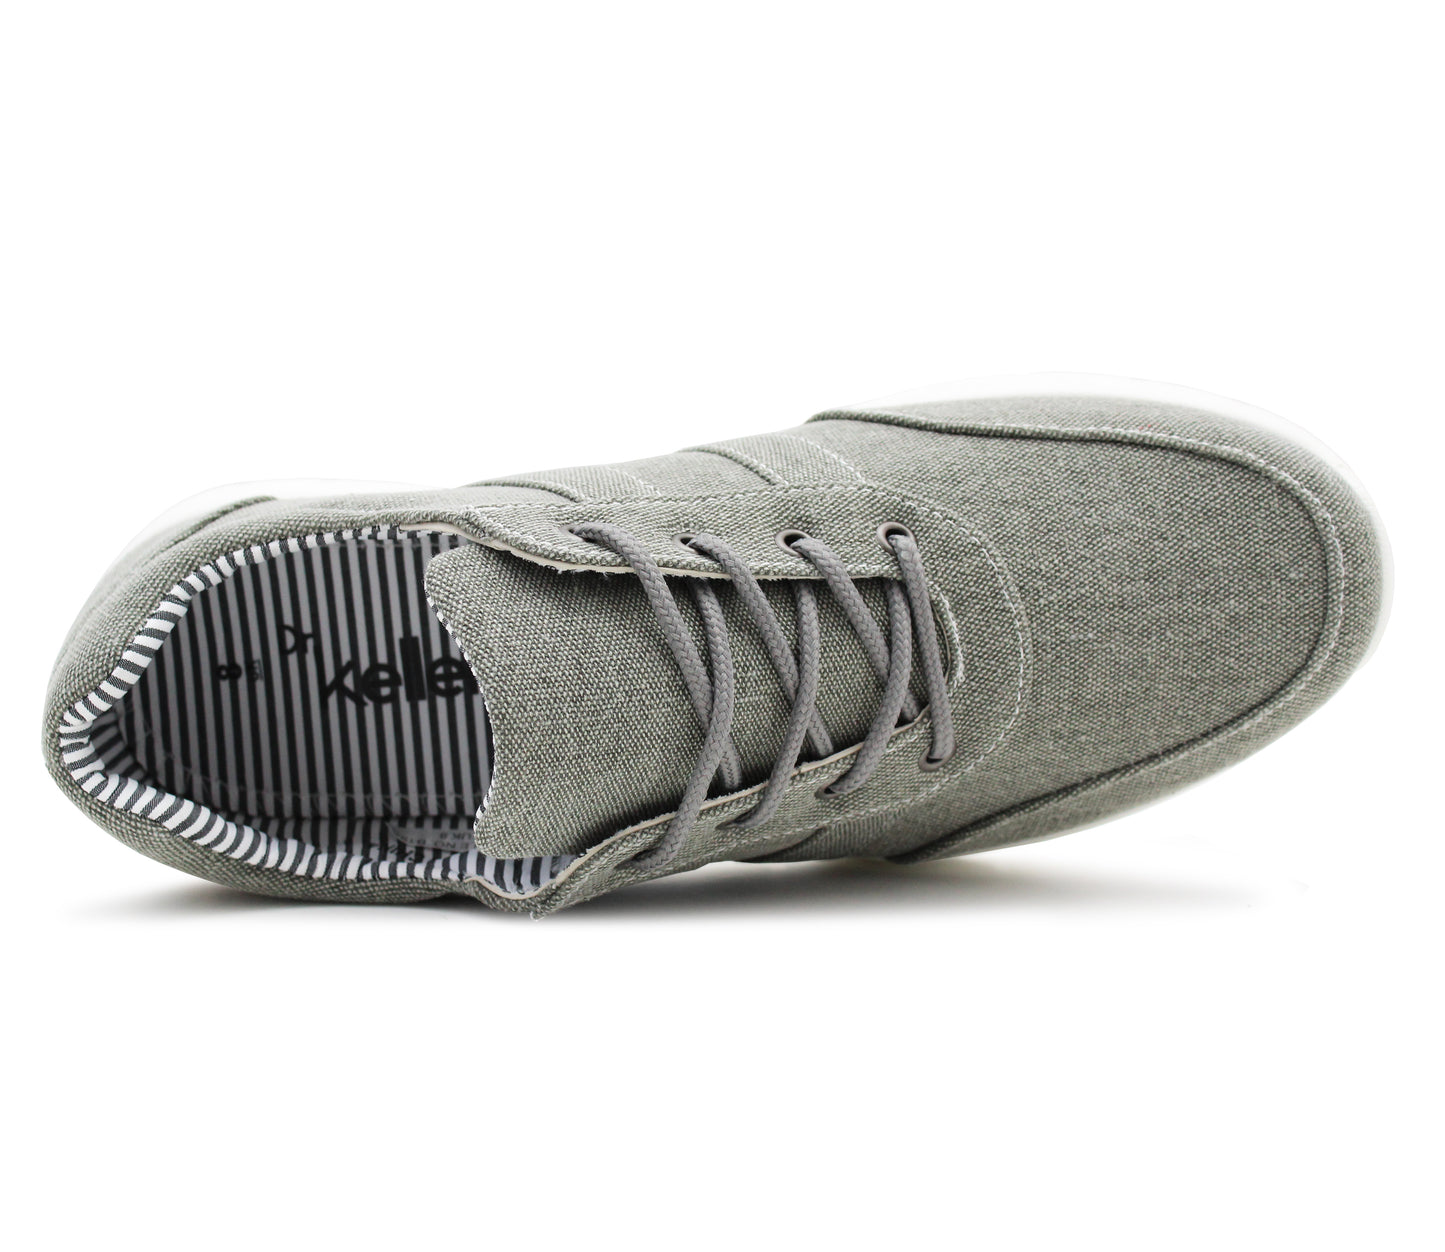 Mens Canvas Denim Lace Up Trainers Grey Smart Casual Flat Low Top Sneaker Pumps